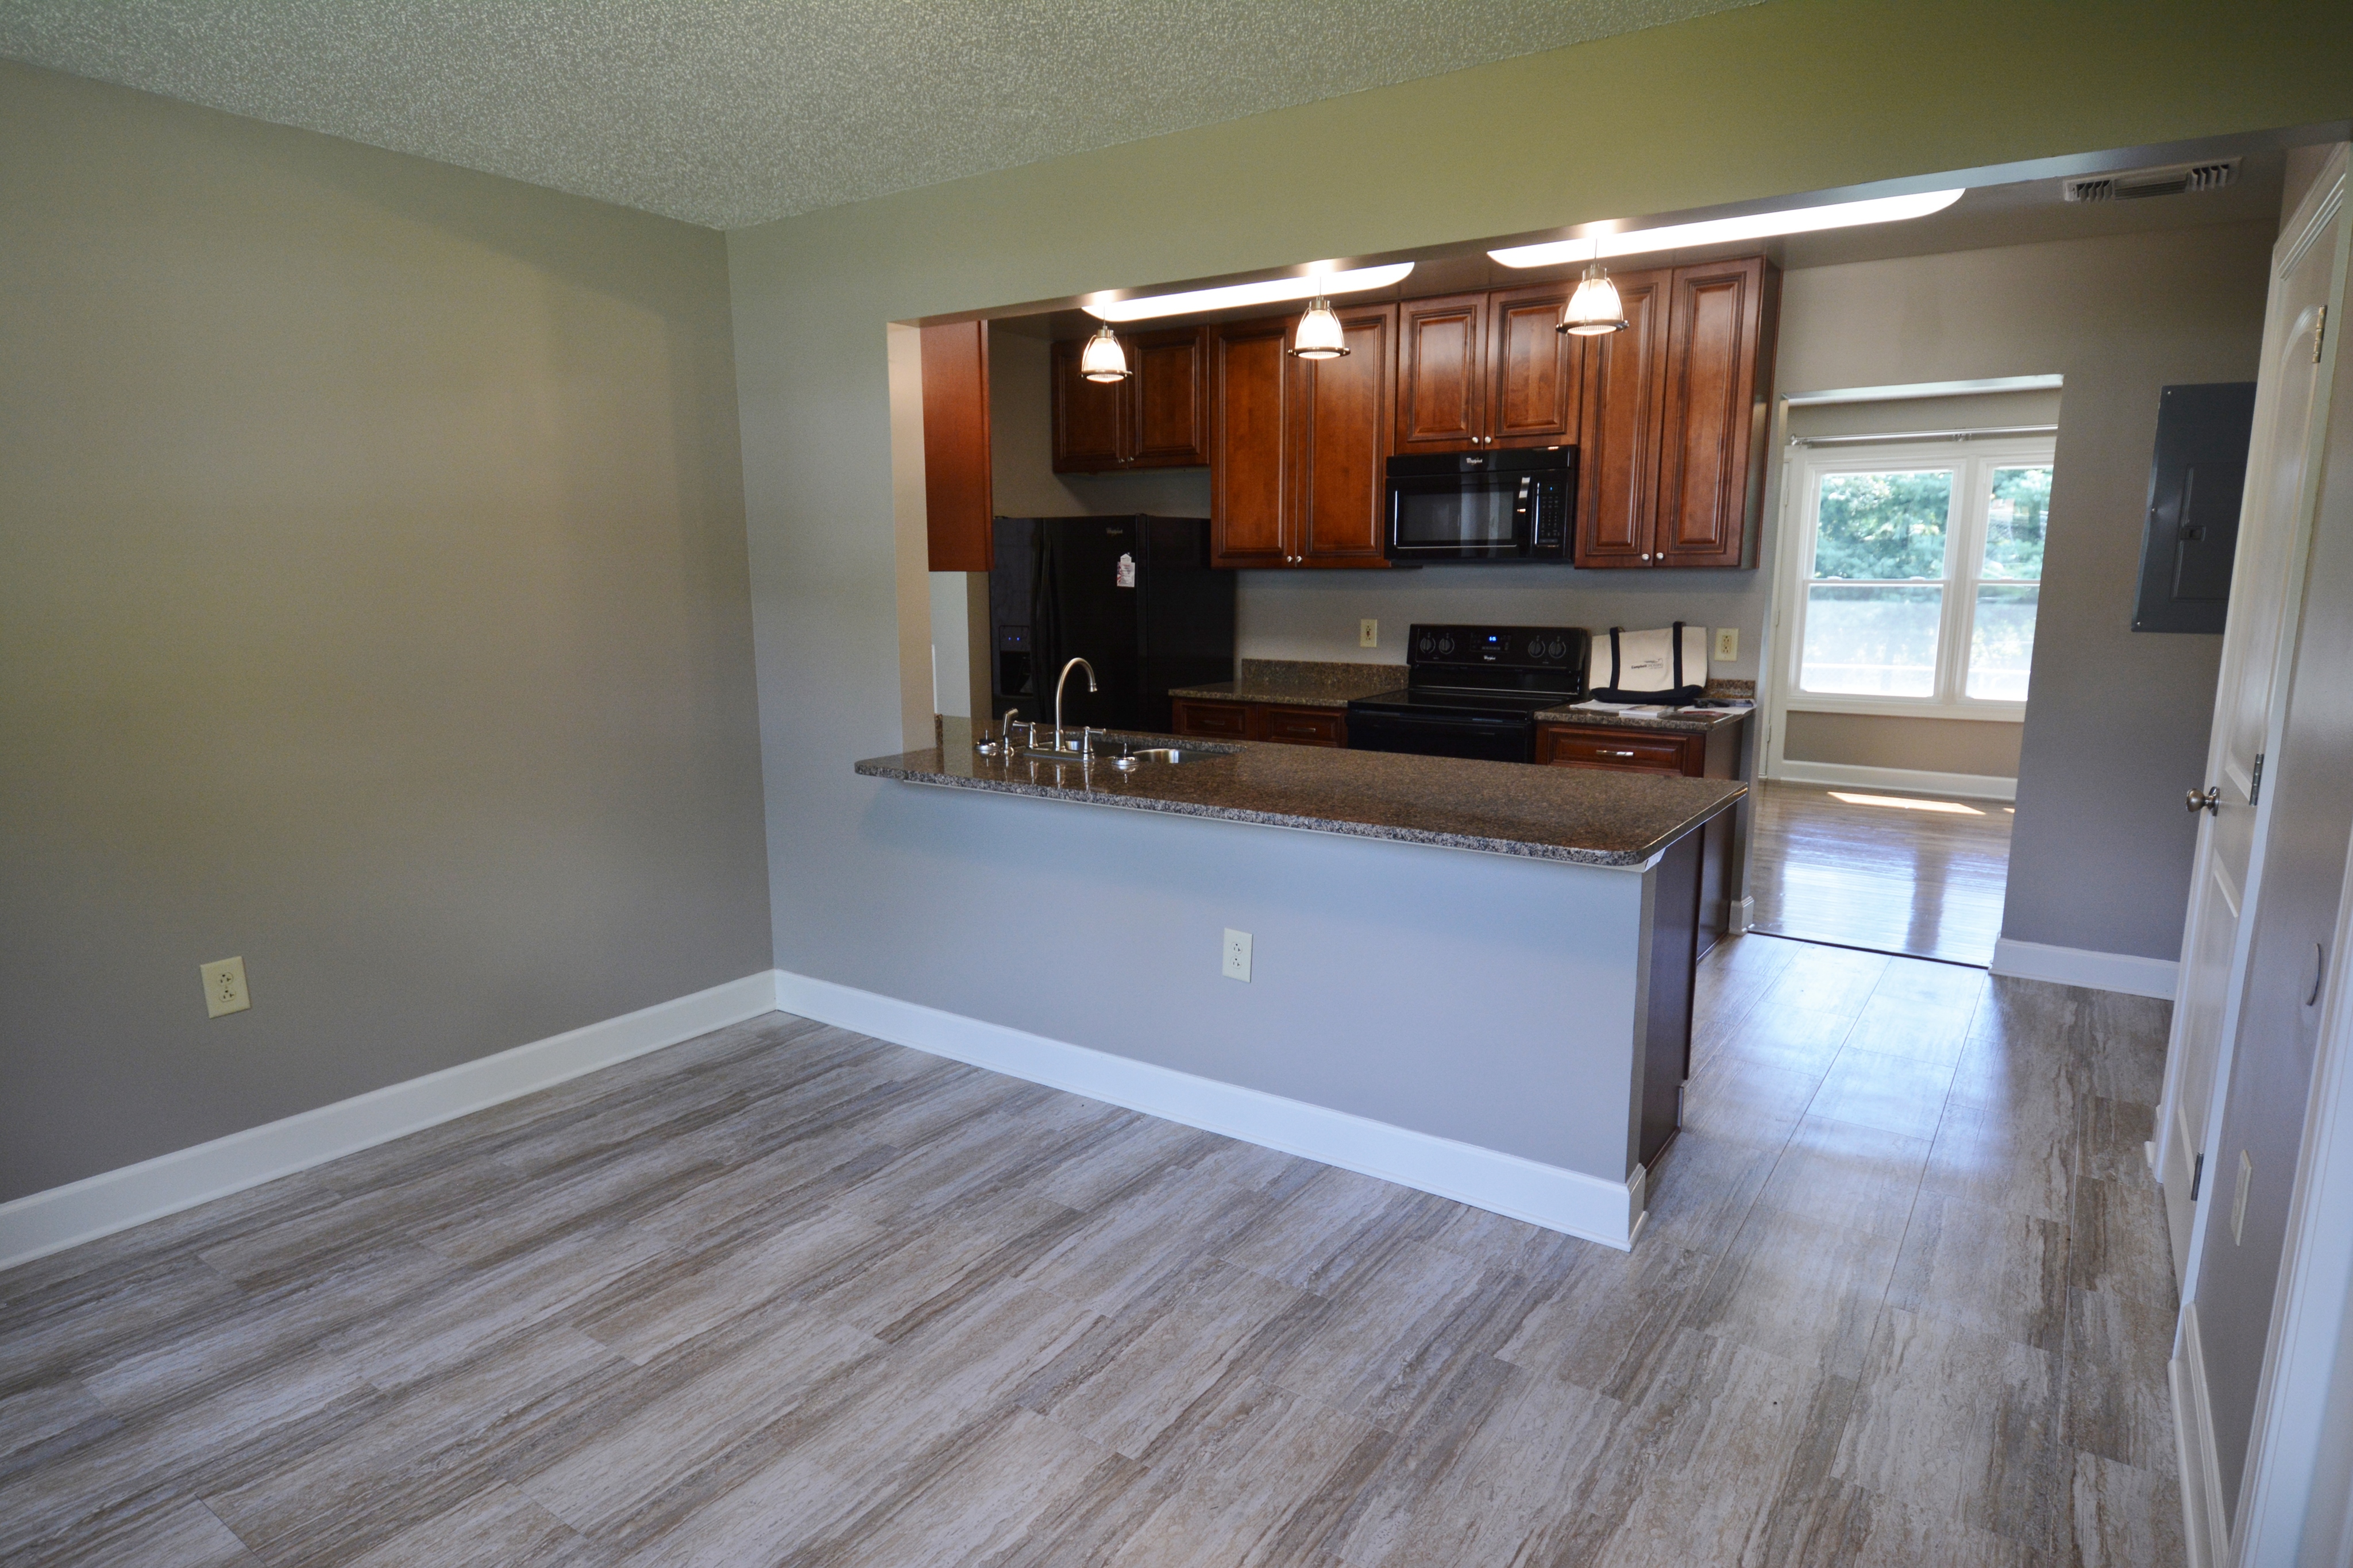 Elegant Kitchen | Apartments in Fort Campbell, KY | Campbell Crossing